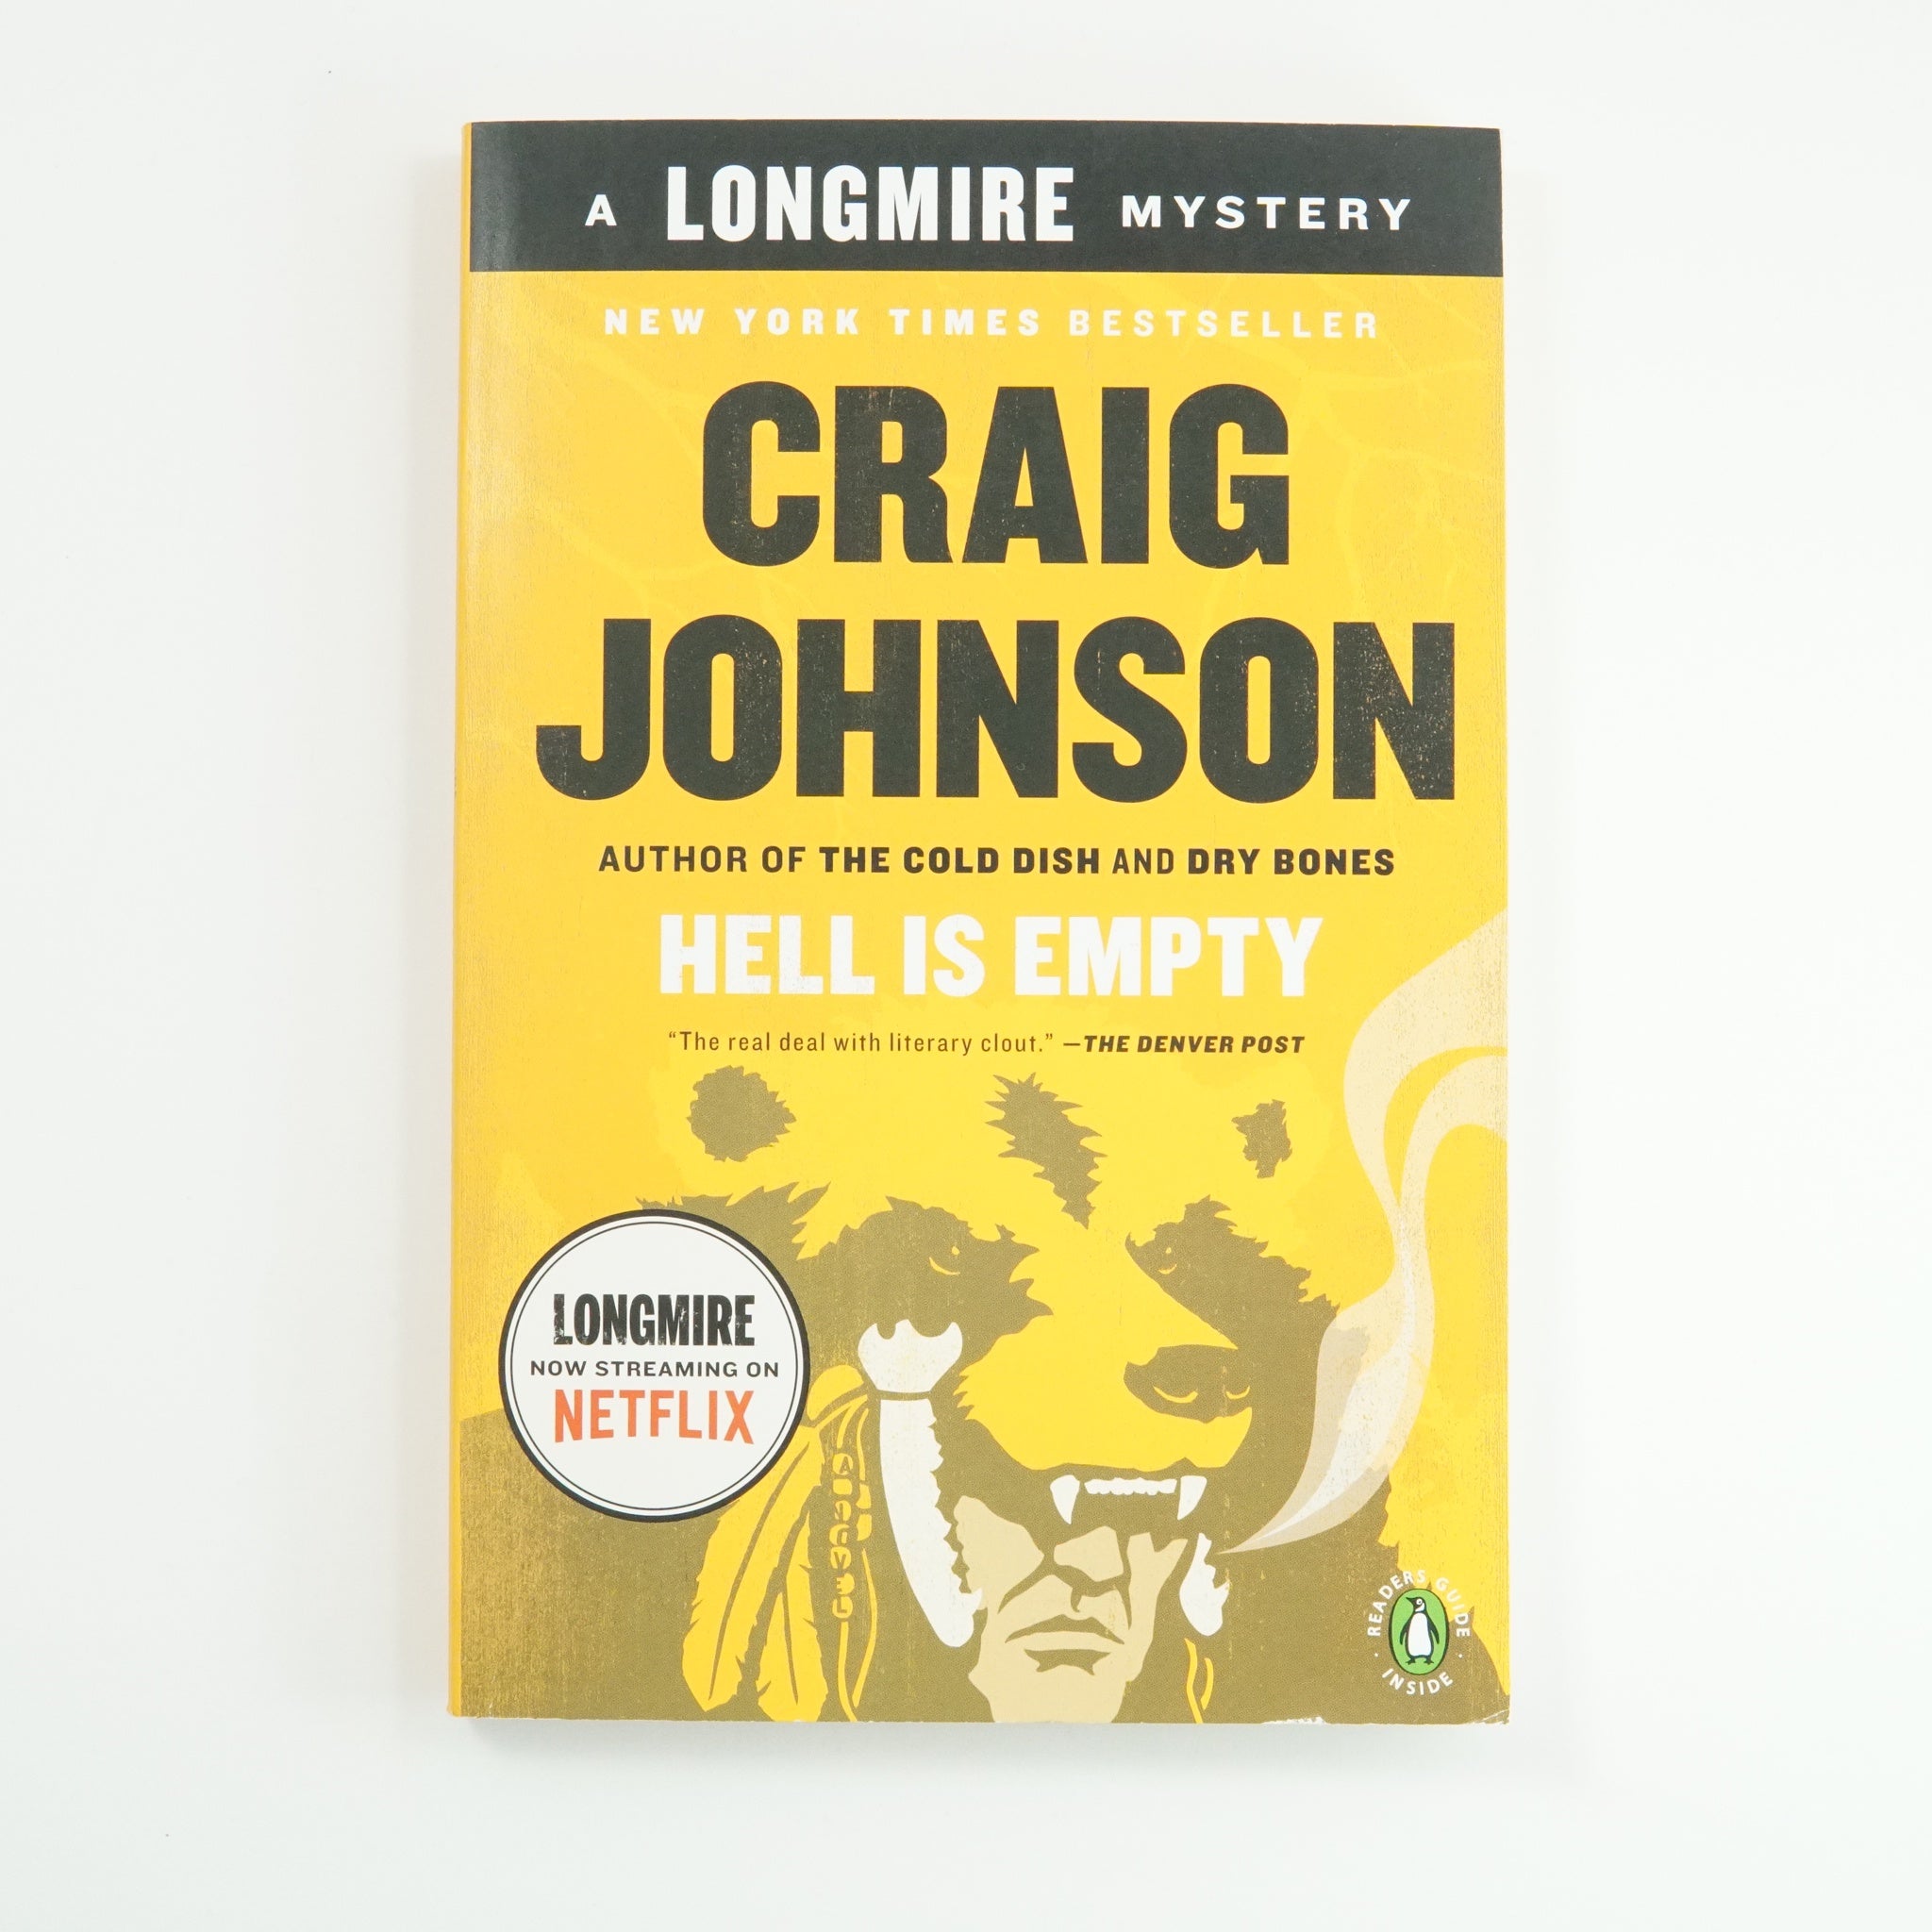 BK 5 HELL IS EMPTY BY CRAIG JOHNSON #21040677 AUG22